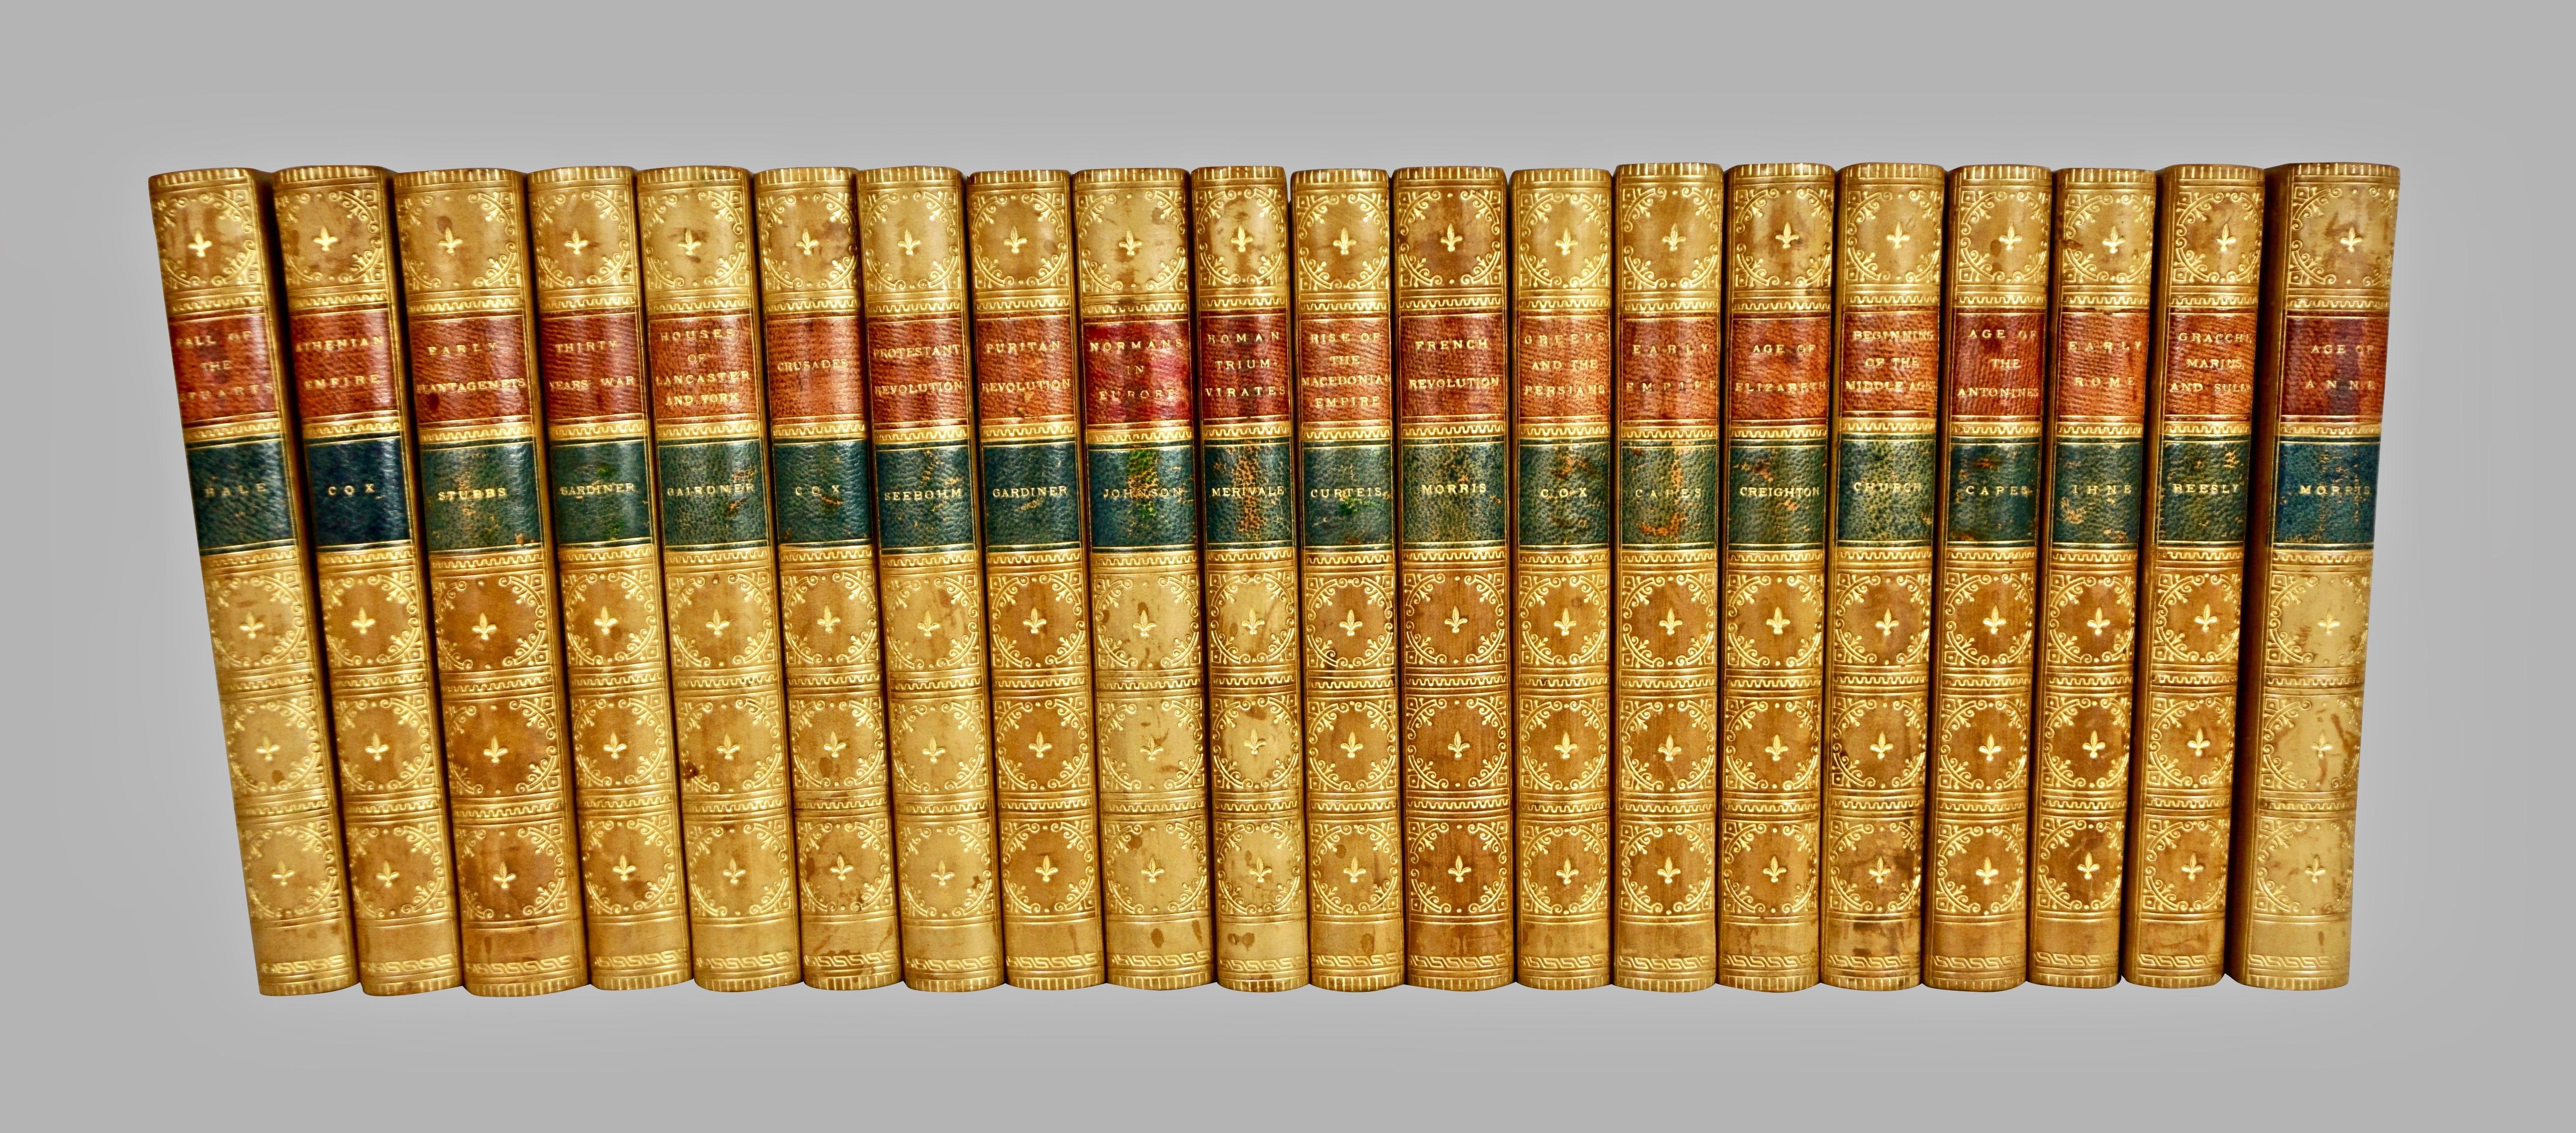 An attractive 20 volume set concerning the histories of various older civilizations including the Greeks, Persians, Plantagenets and the Norman Conquest. This set is bound in 3/4 leather with marbleized boards and endpapers with raised spines and